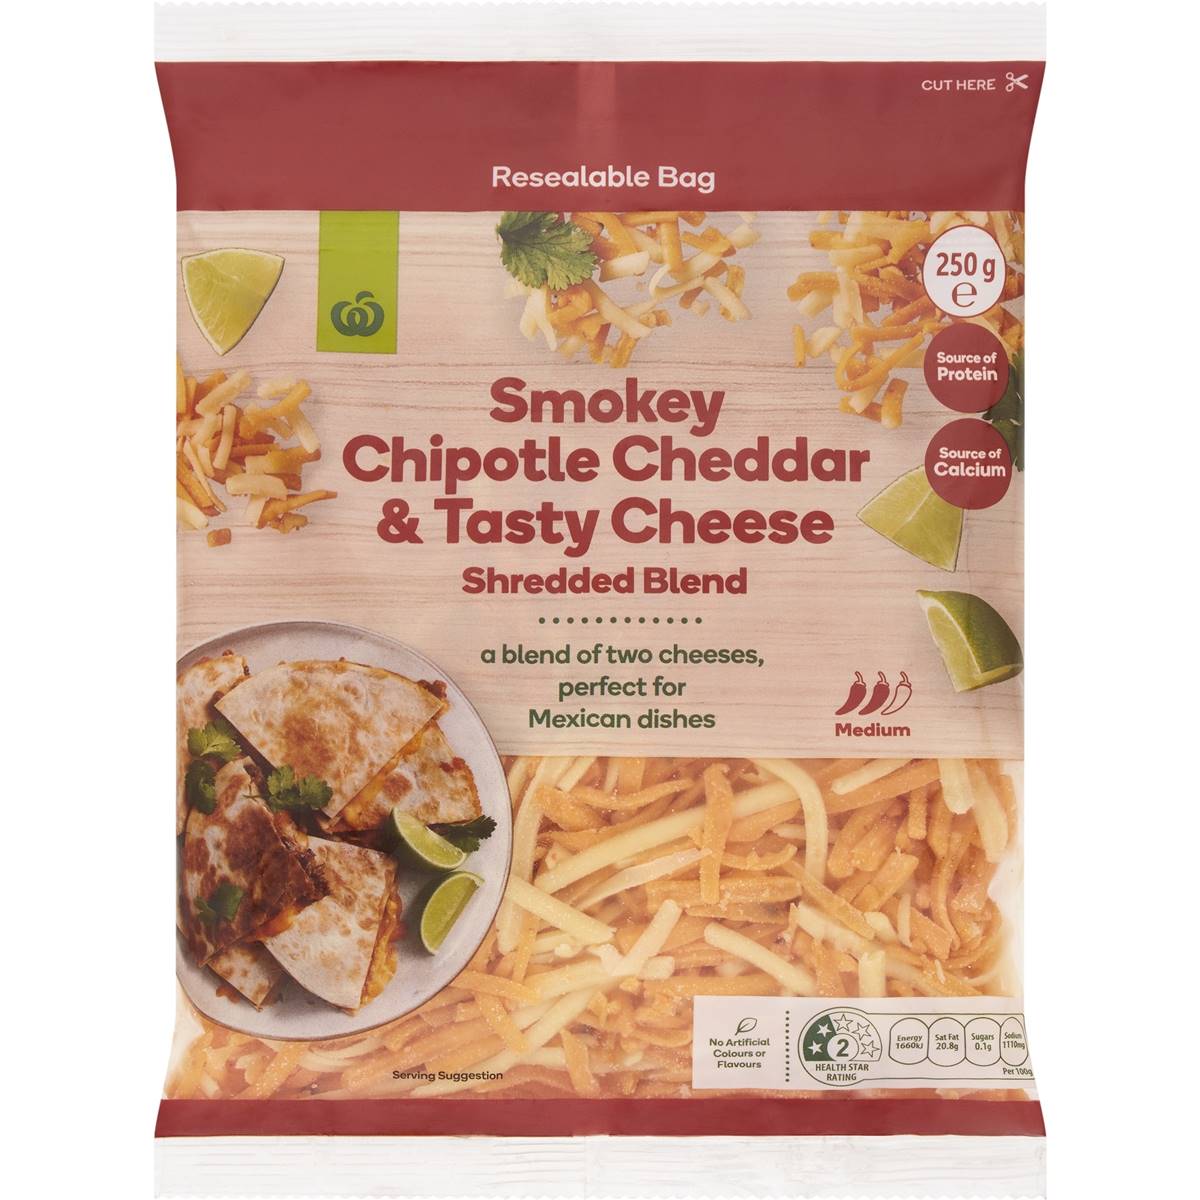 Calories in Woolworths Smokey Chipotle Cheddar & Tasty Cheese Shredded Blend